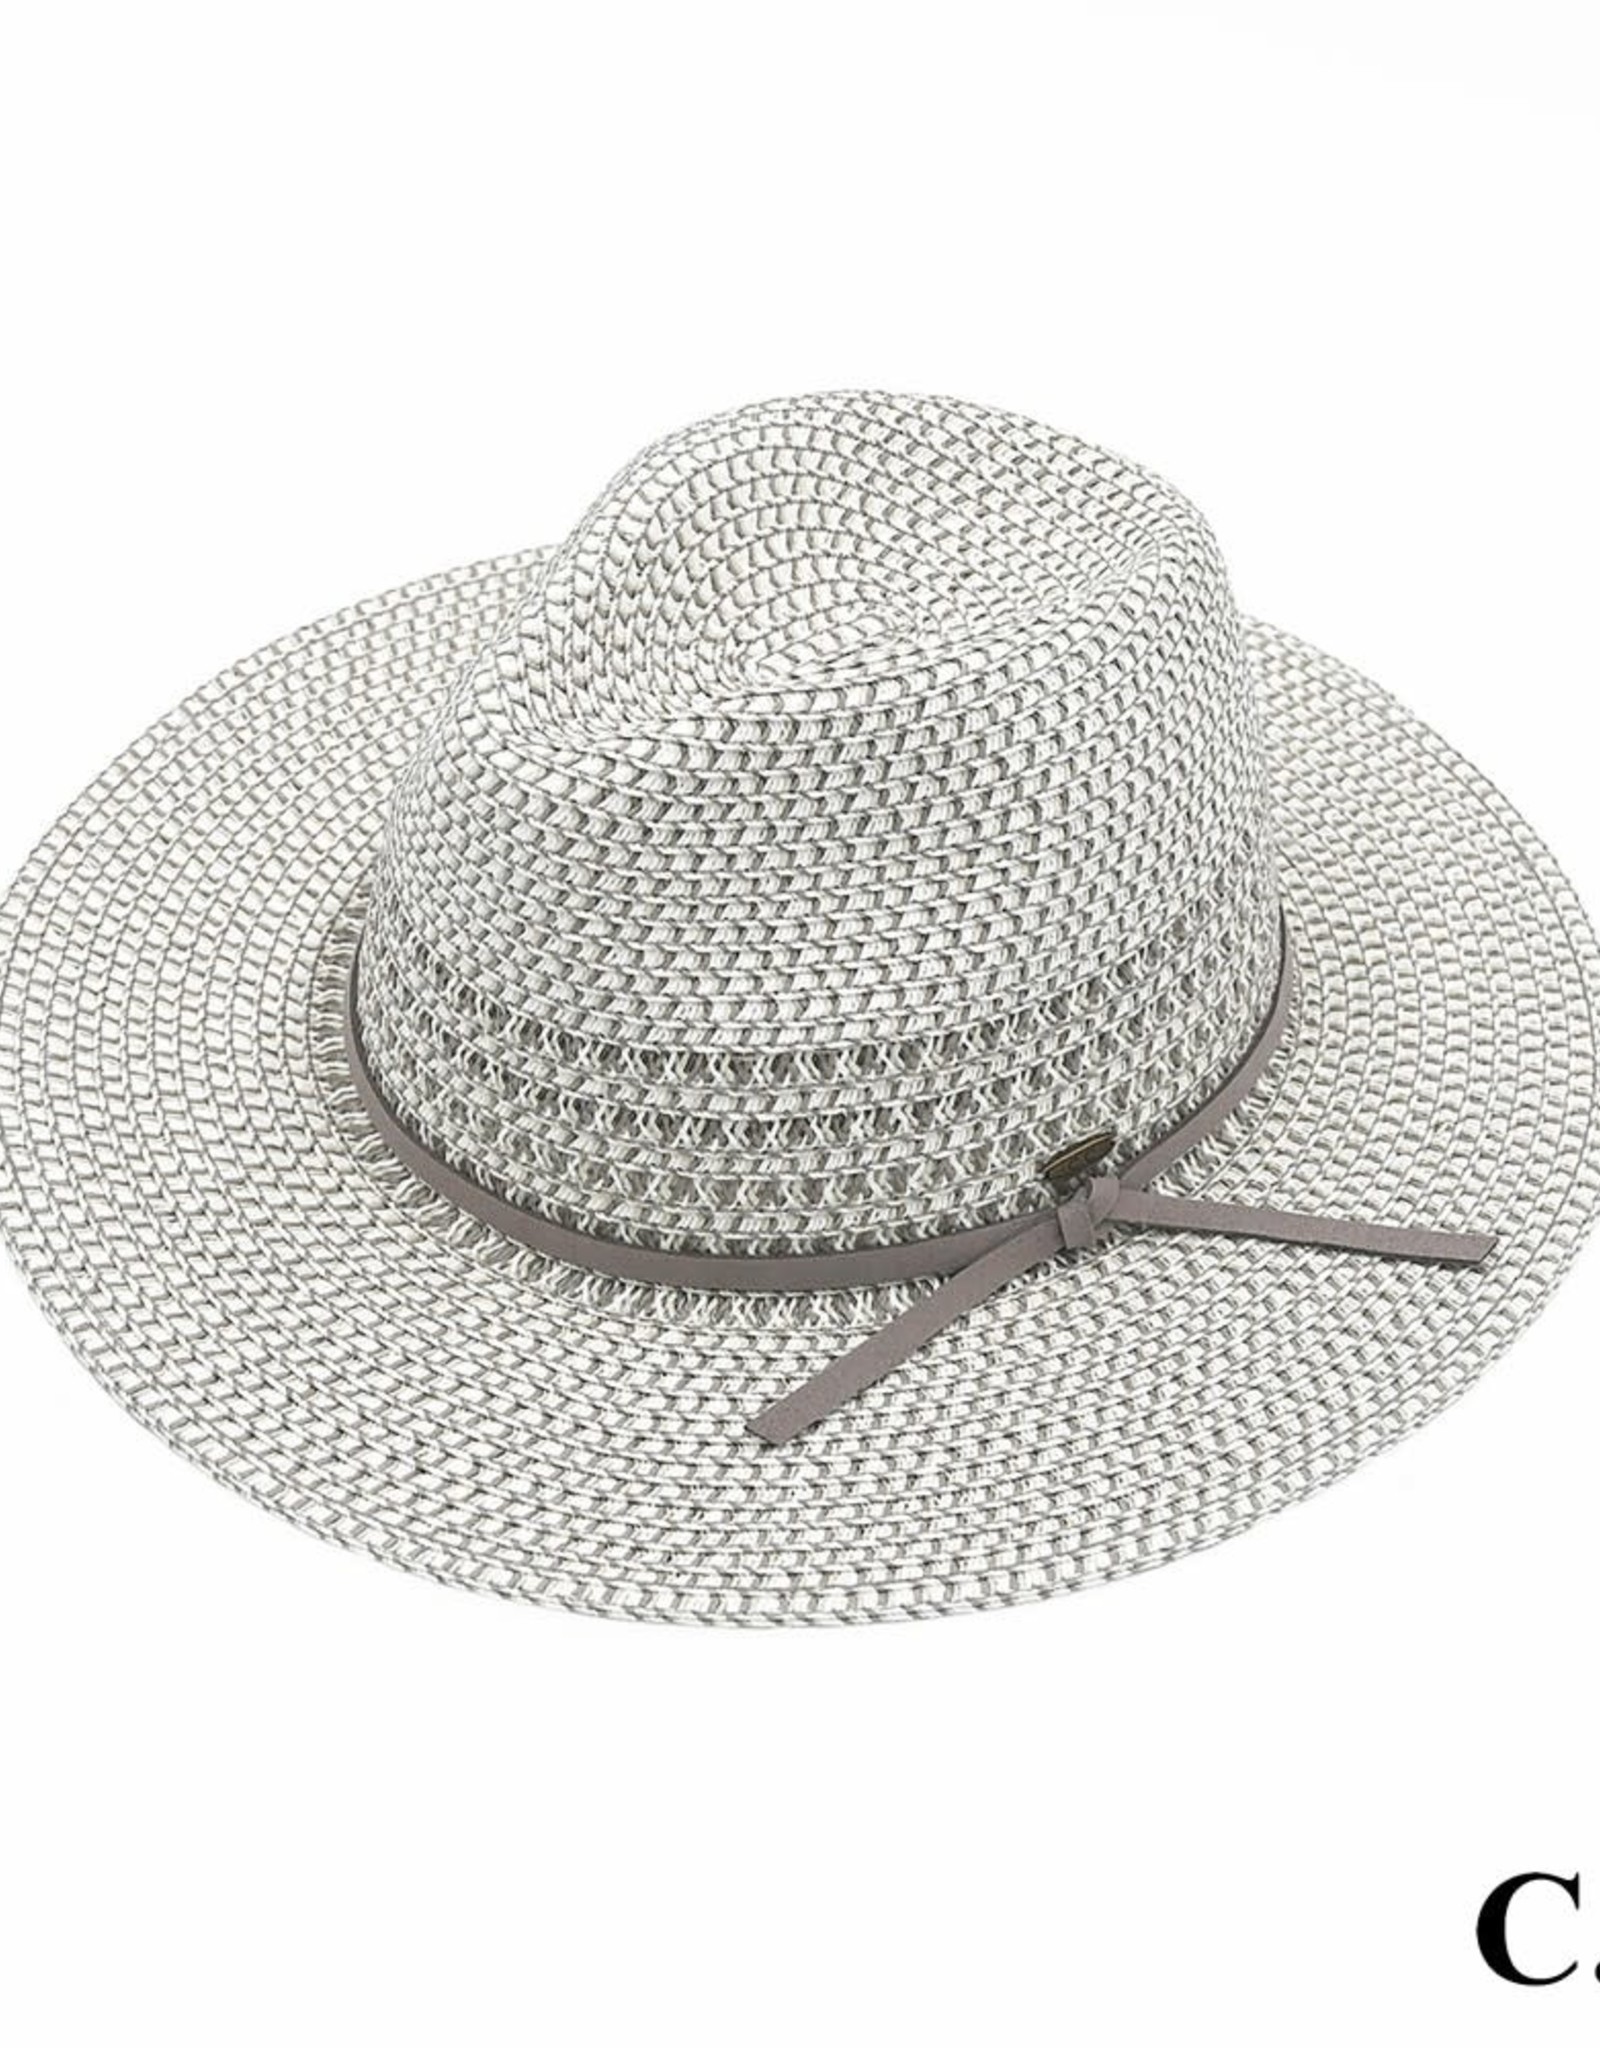 judson 729204 - C.C Multi-Color Heather Panama Straw Hat With Faux Suede Trim Band  - Light Gray